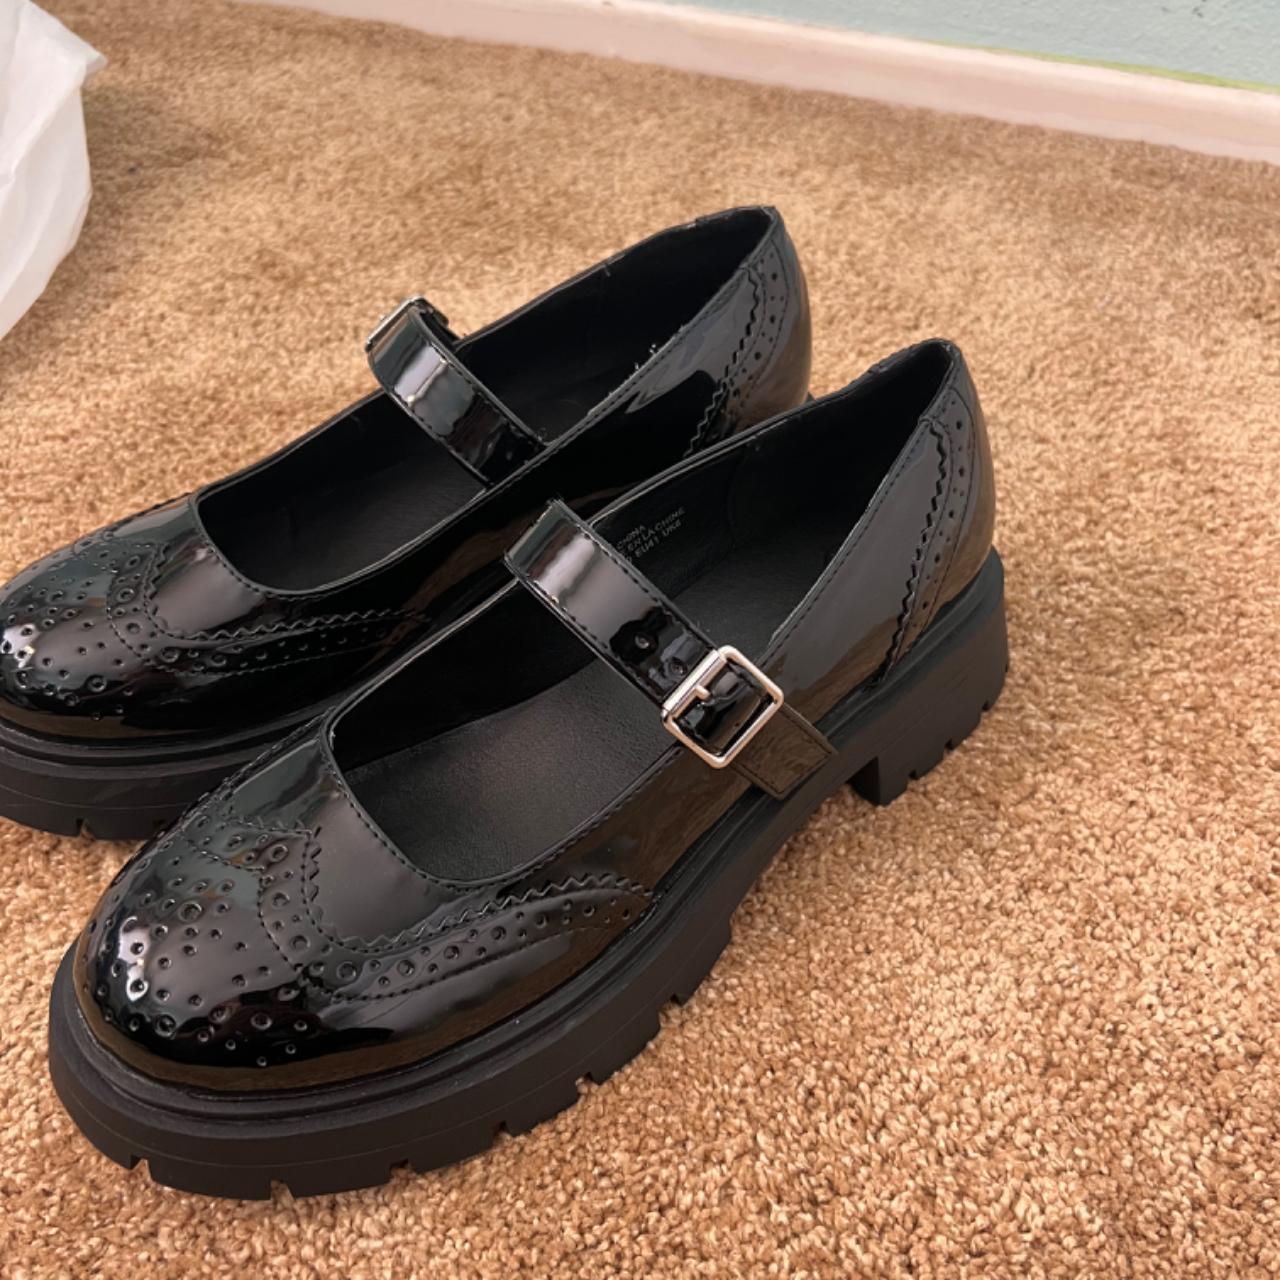 Urban Outfitters Women's Black Loafers (3)